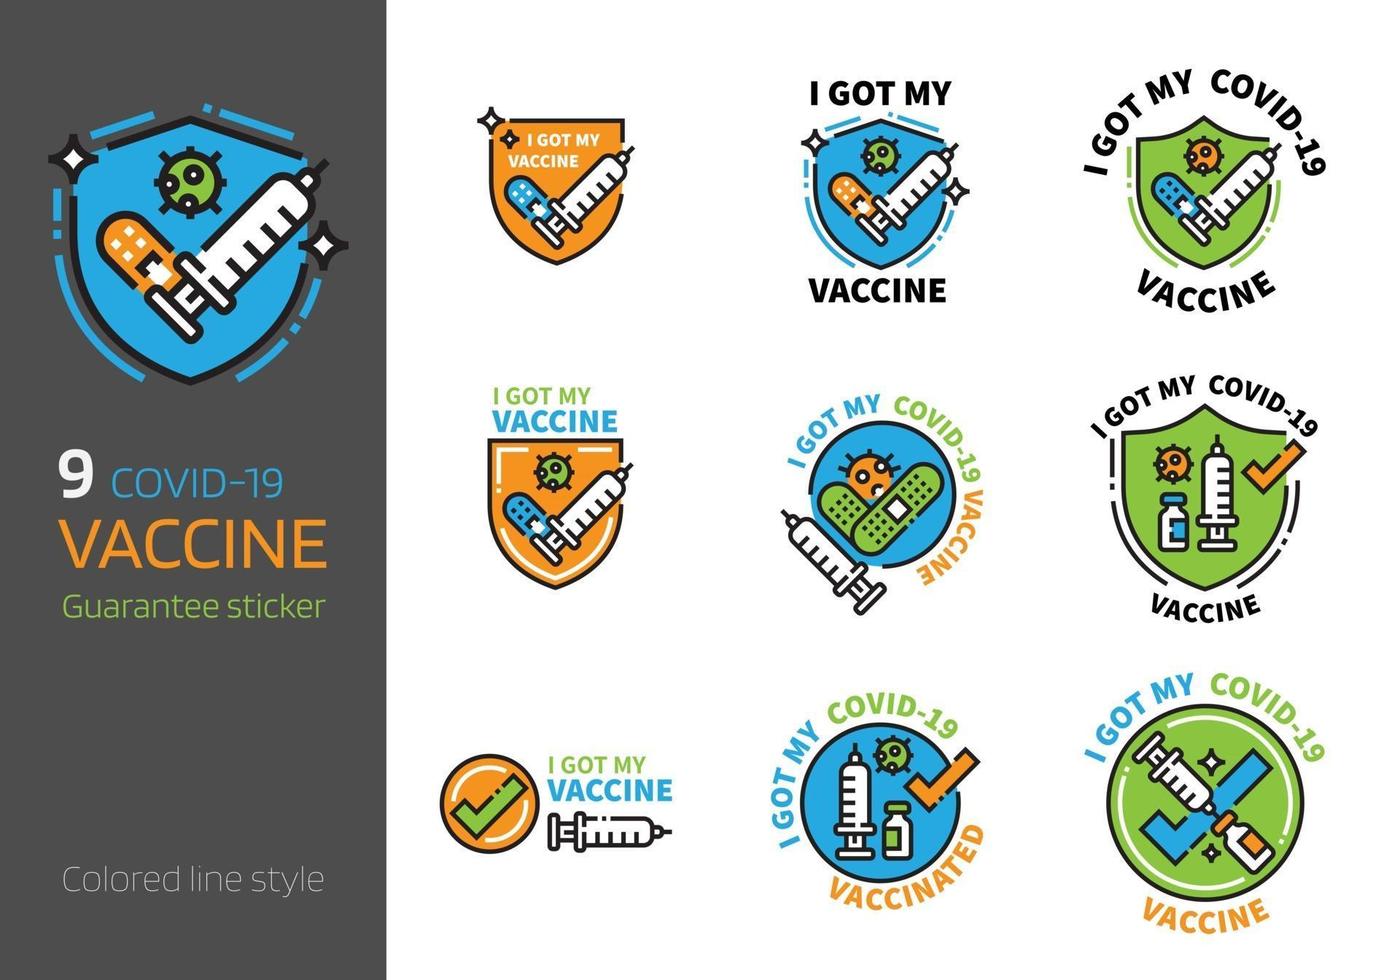 Covid 2019 vaccination sign colored line style vector